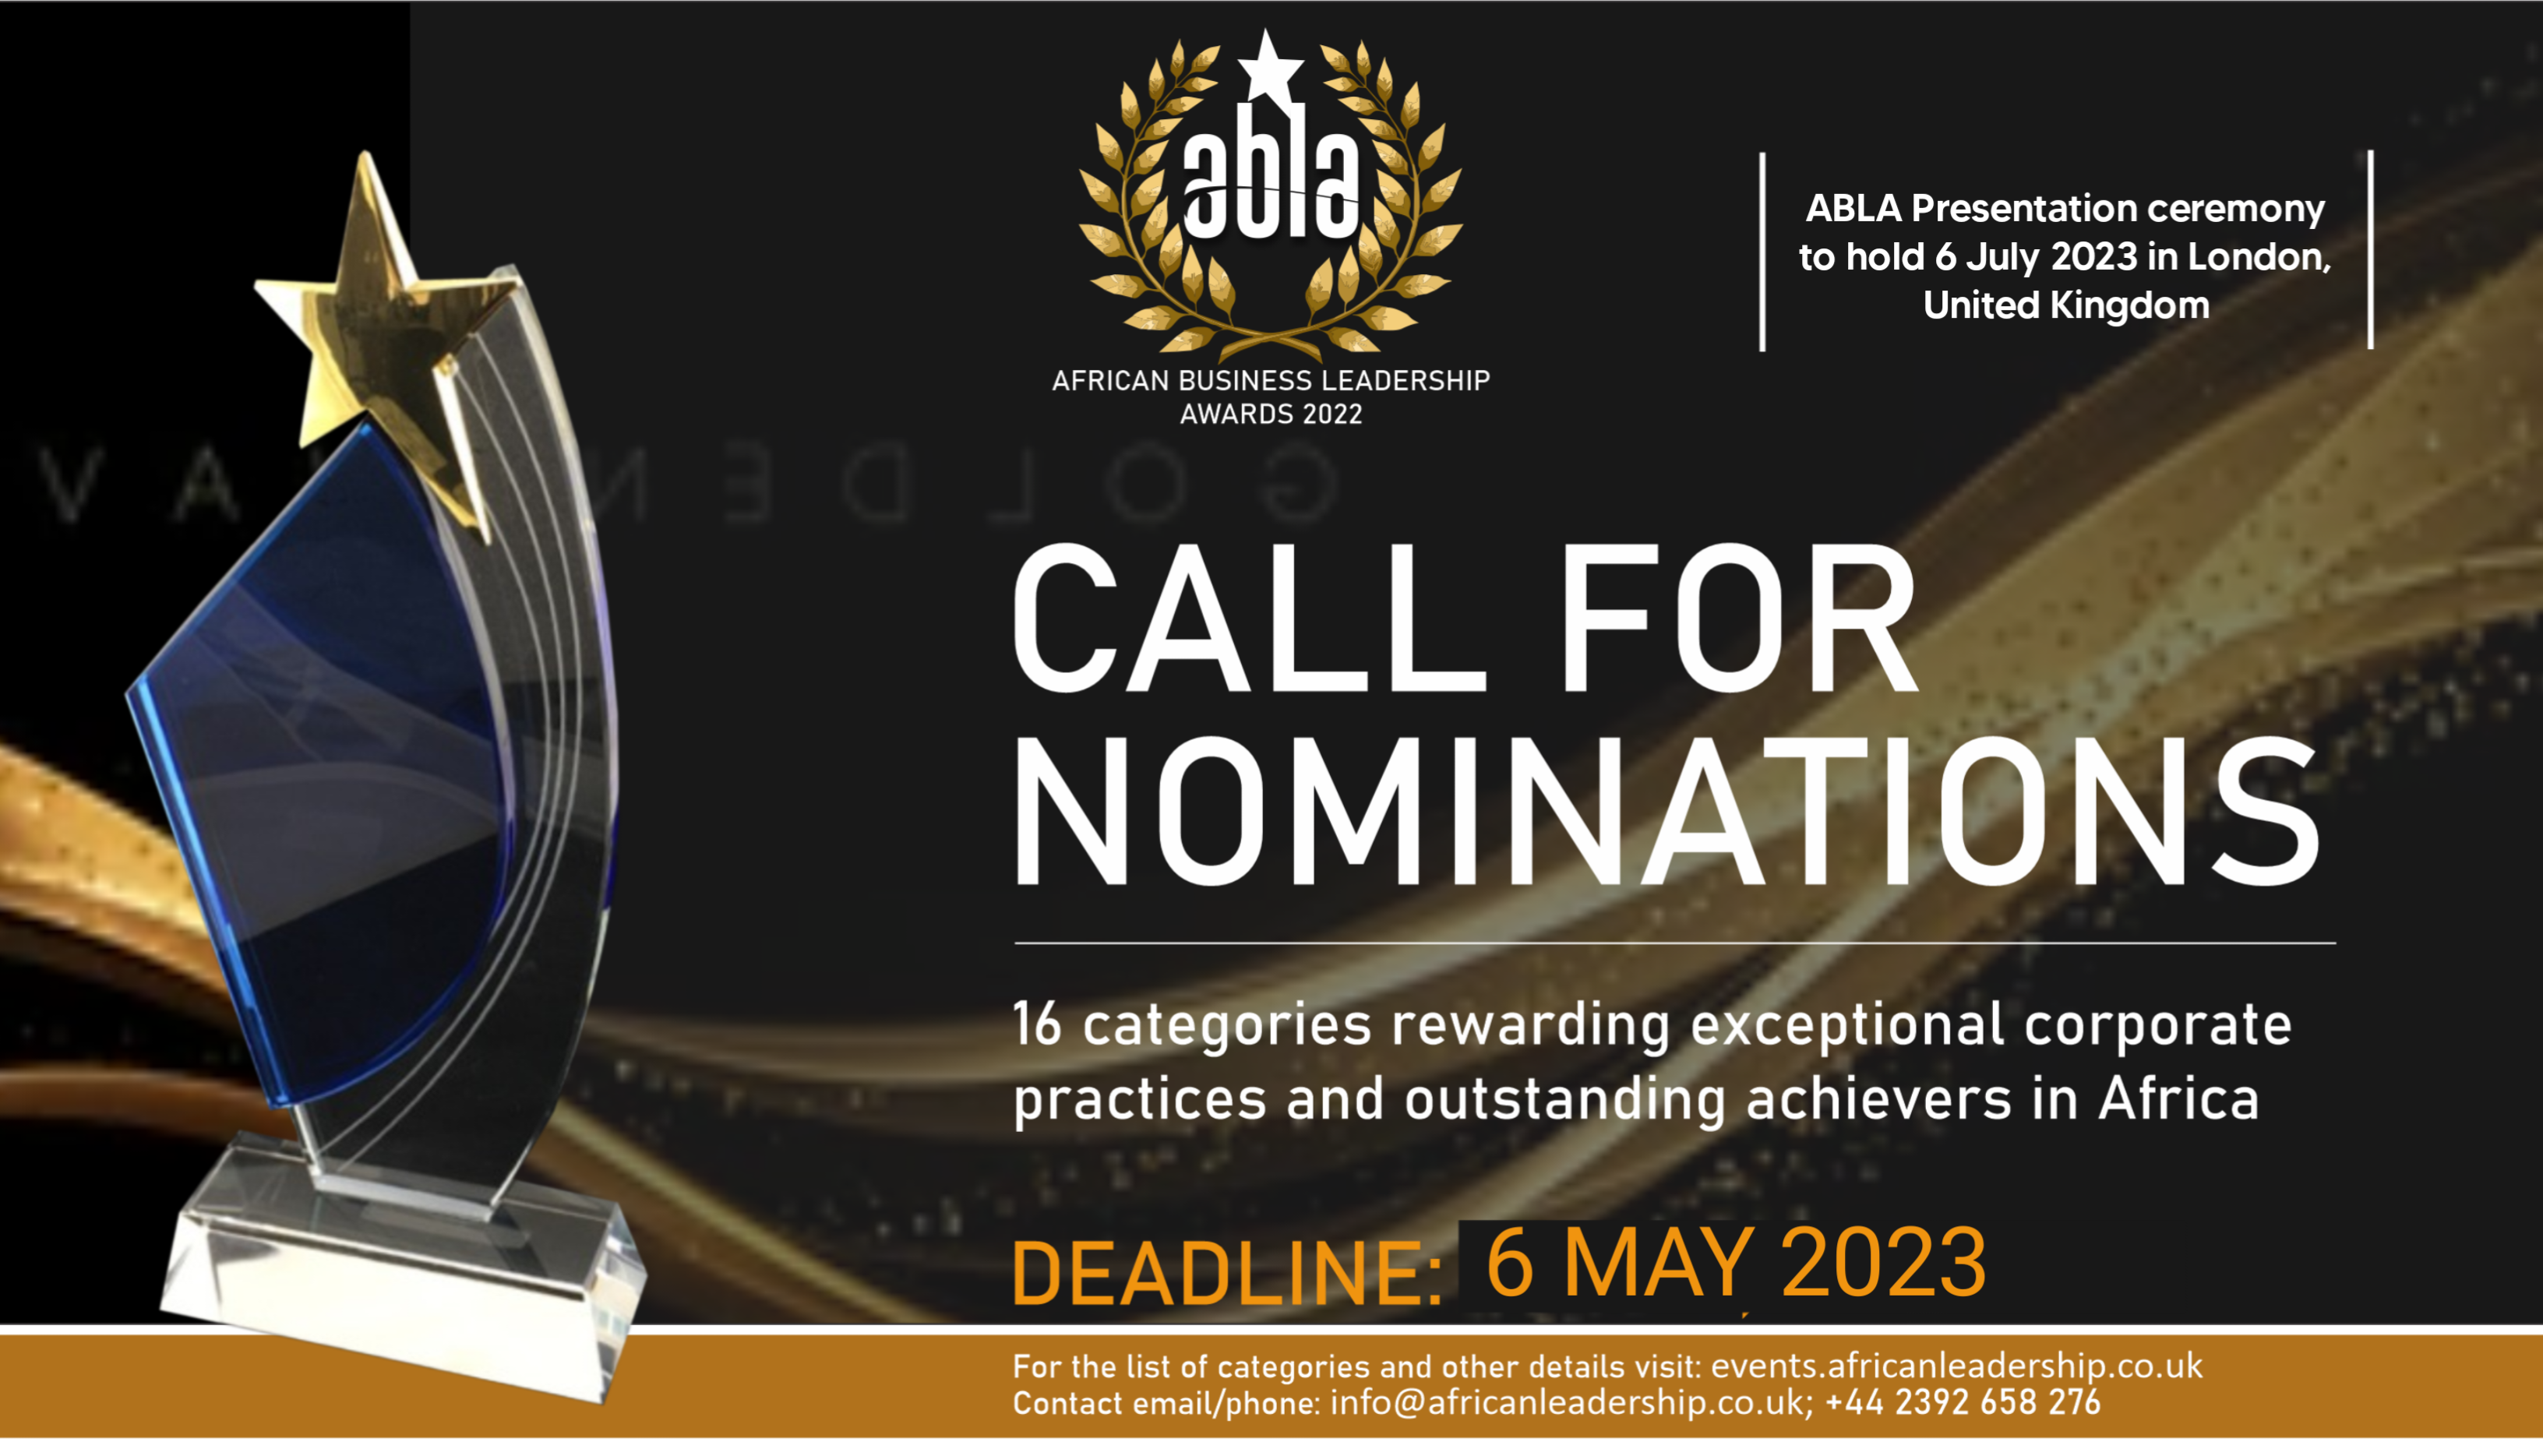 CALL FOR NOMINATIONS FOR AFRICAN BUSINESS LEADERSHIP AWARDS (ABLA) 2023